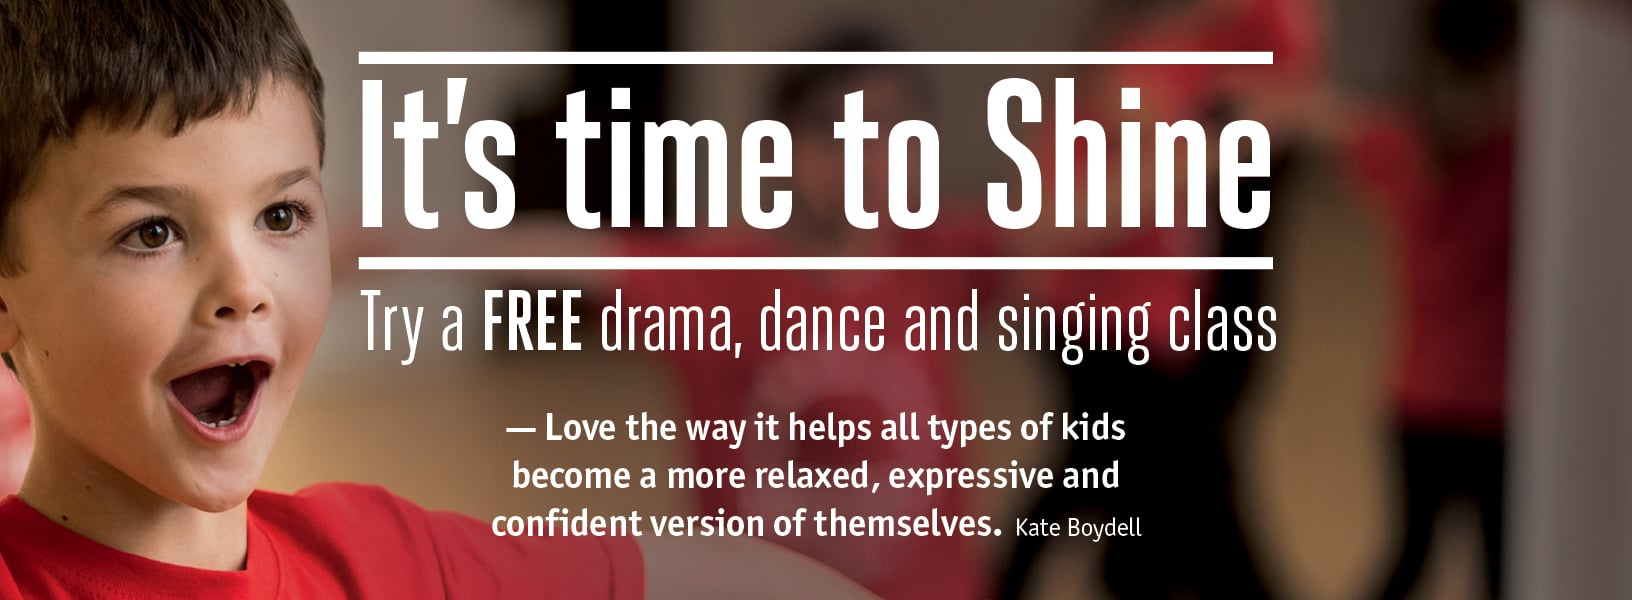 It's time to Shine - book a FREE drama, dance and singing class at your nearest venue